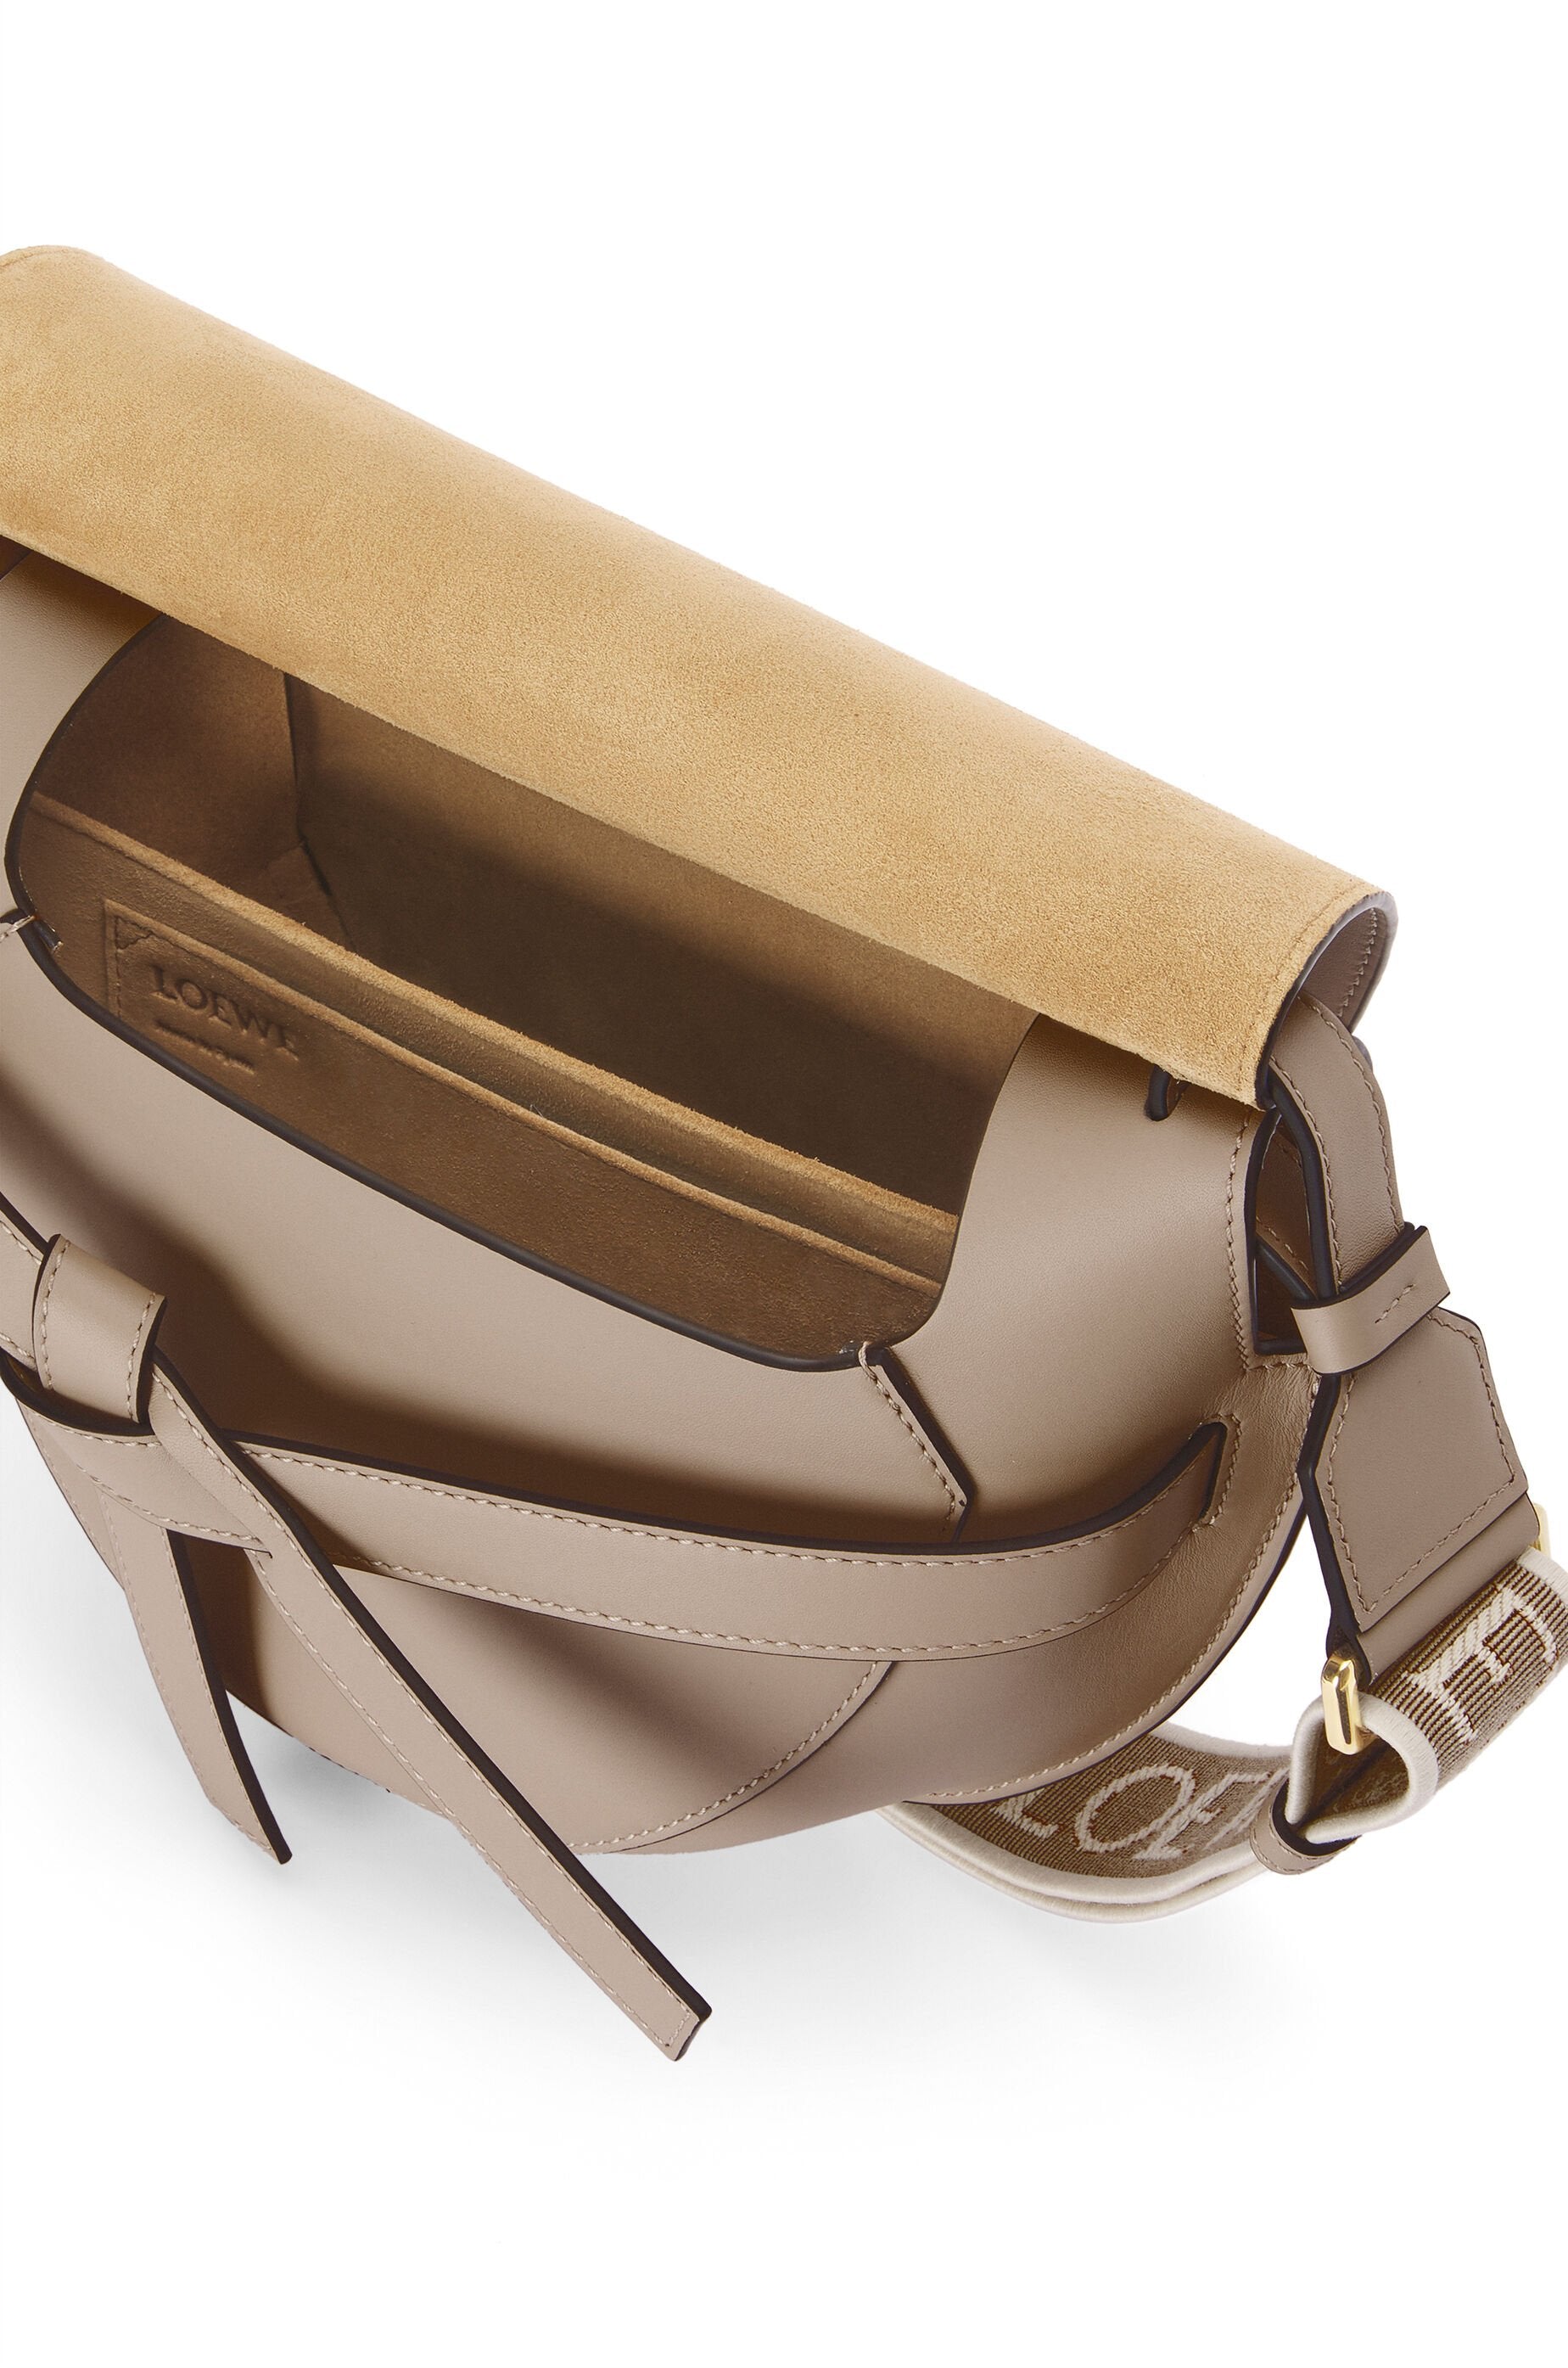 Loewe Small Gate bag in soft calfskin and jacquard (Colour: Sand)